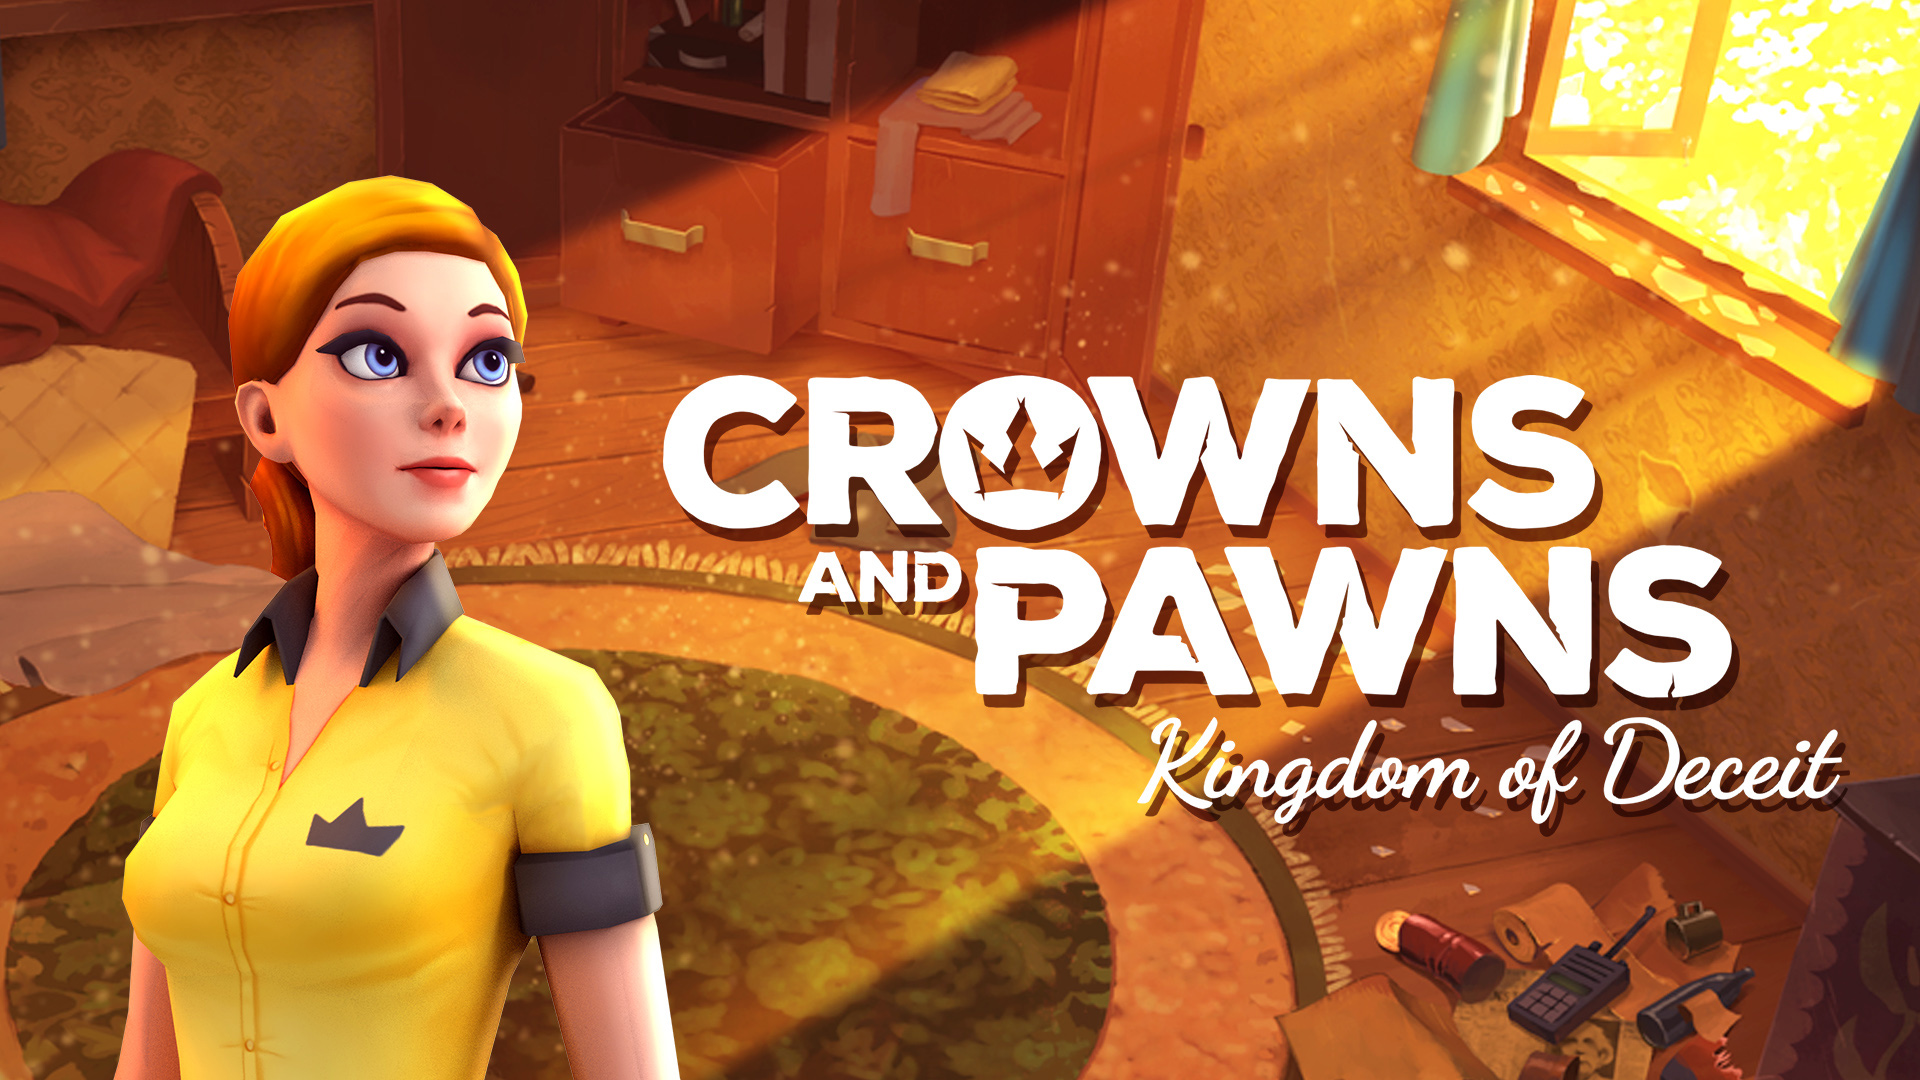 Video Game Crowns and Pawns: Kingdom of Deceit HD Wallpaper | Background Image